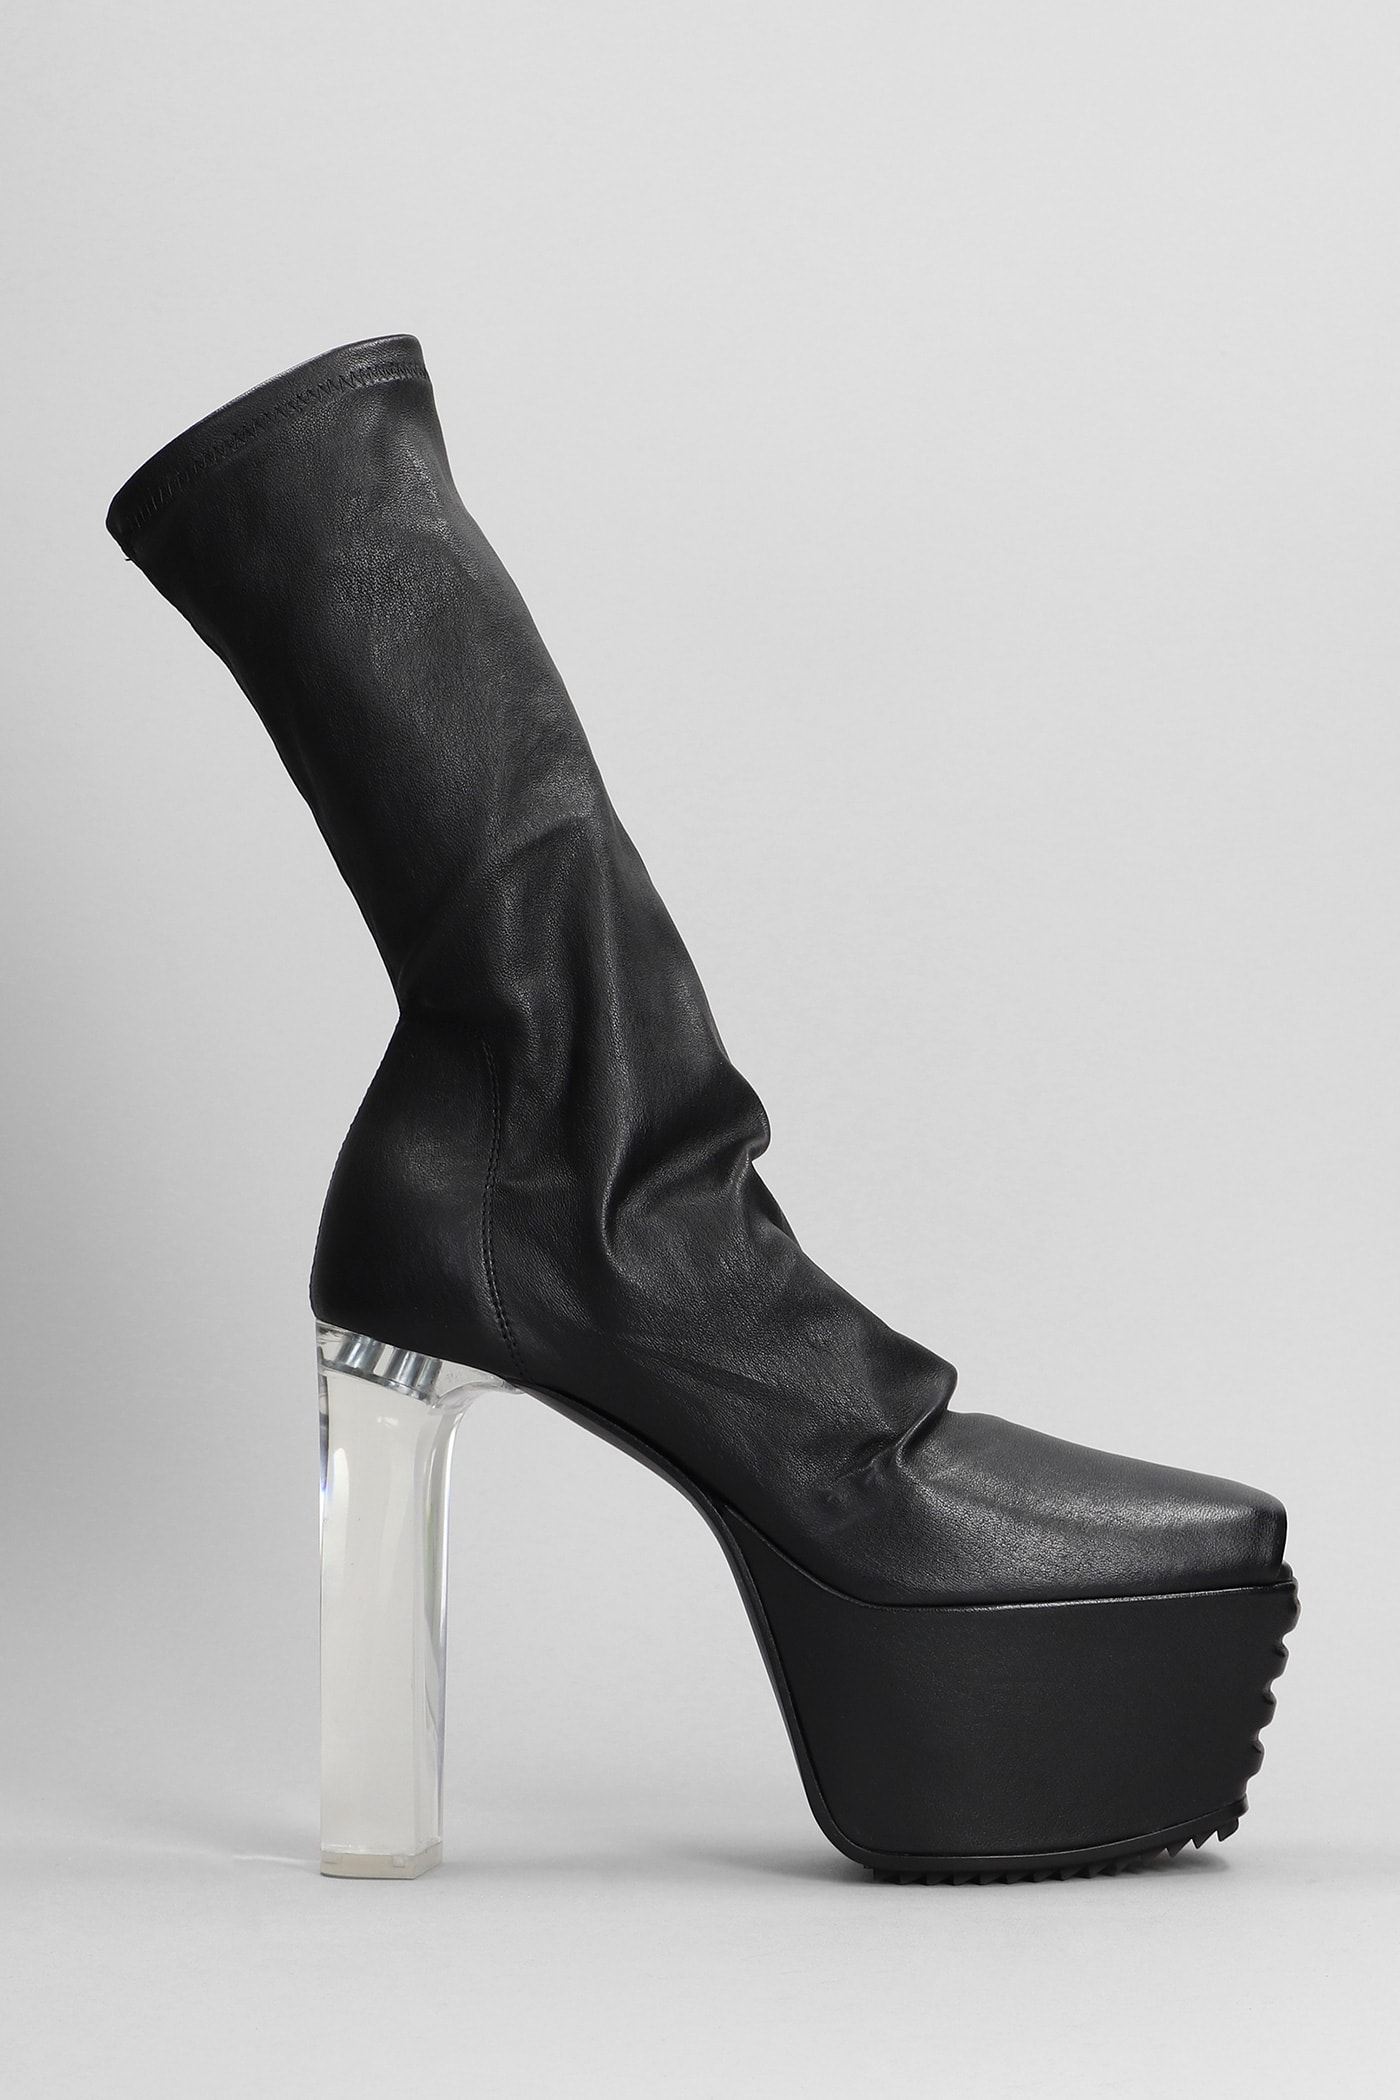 RICK OWENS MINIMAL GRIL STRETCH HIGH HEELS ANKLE BOOTS IN BLACK LEATHER